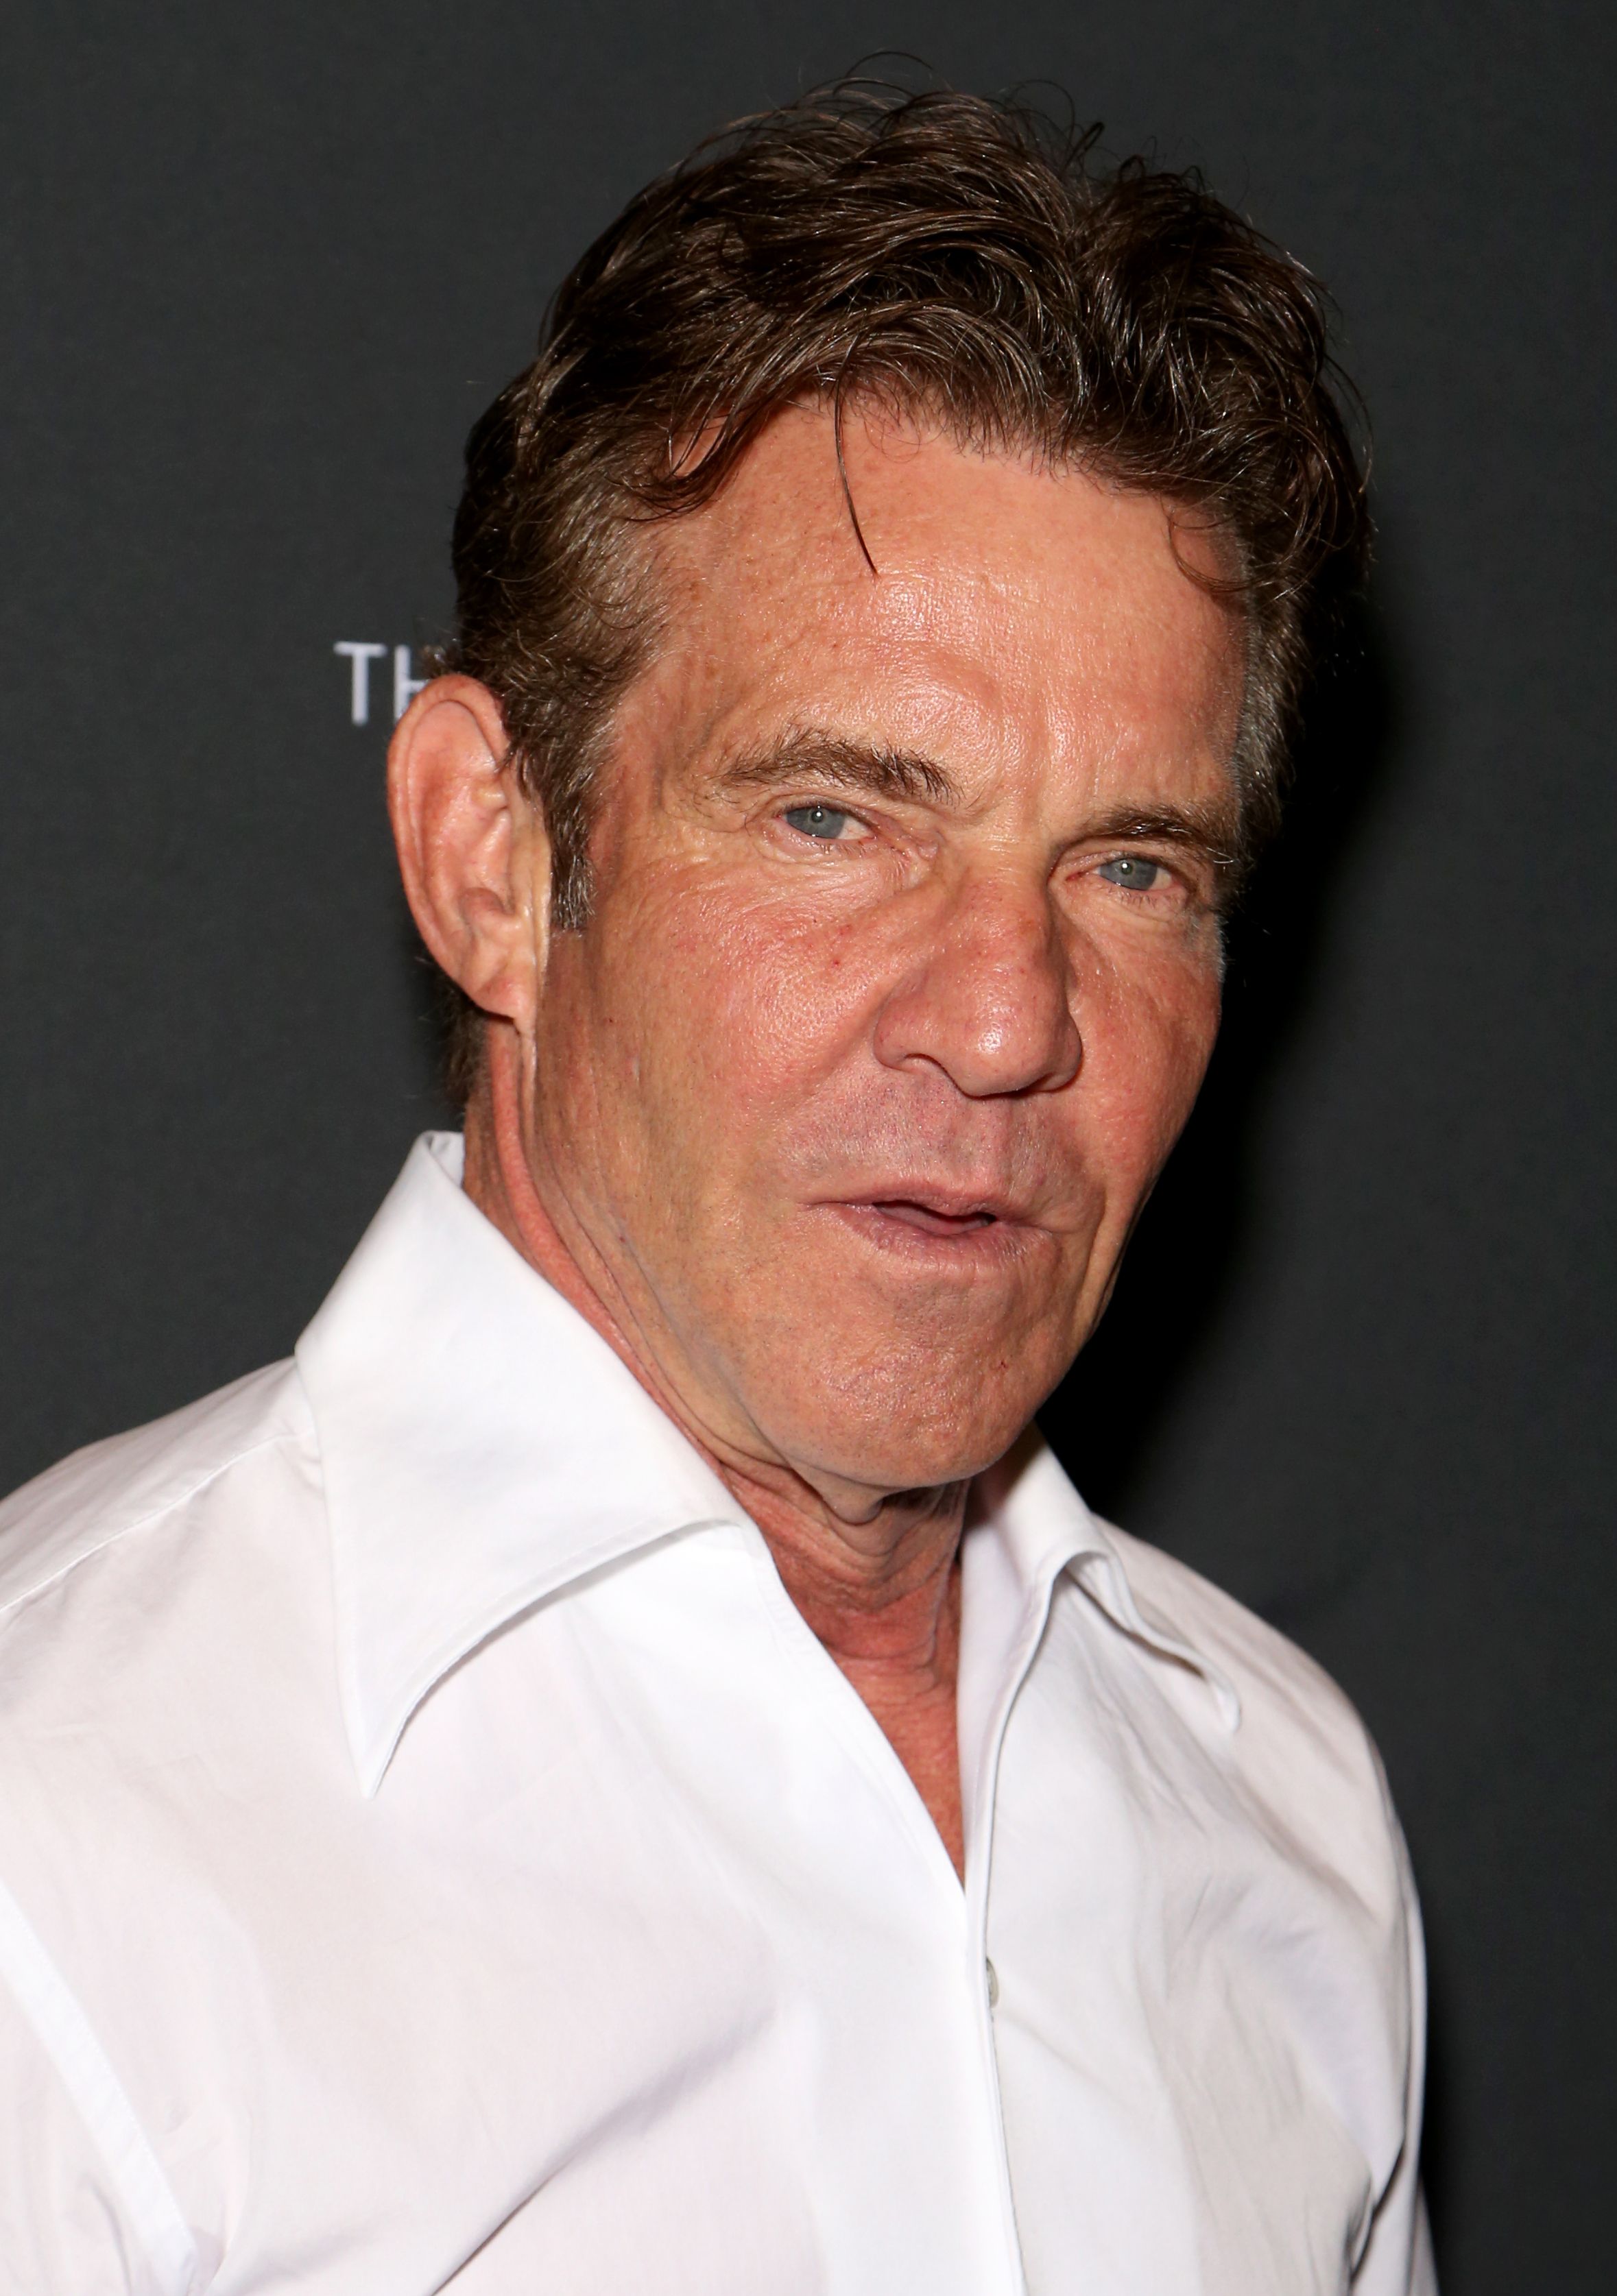 Dennis Quaid participates "Dennis Quaid and The Sharks at The Barbershop Cuts & Cocktails at The Cosmopolitan" of Las Vegas on May 11, 2019. |  Photo: Getty Images